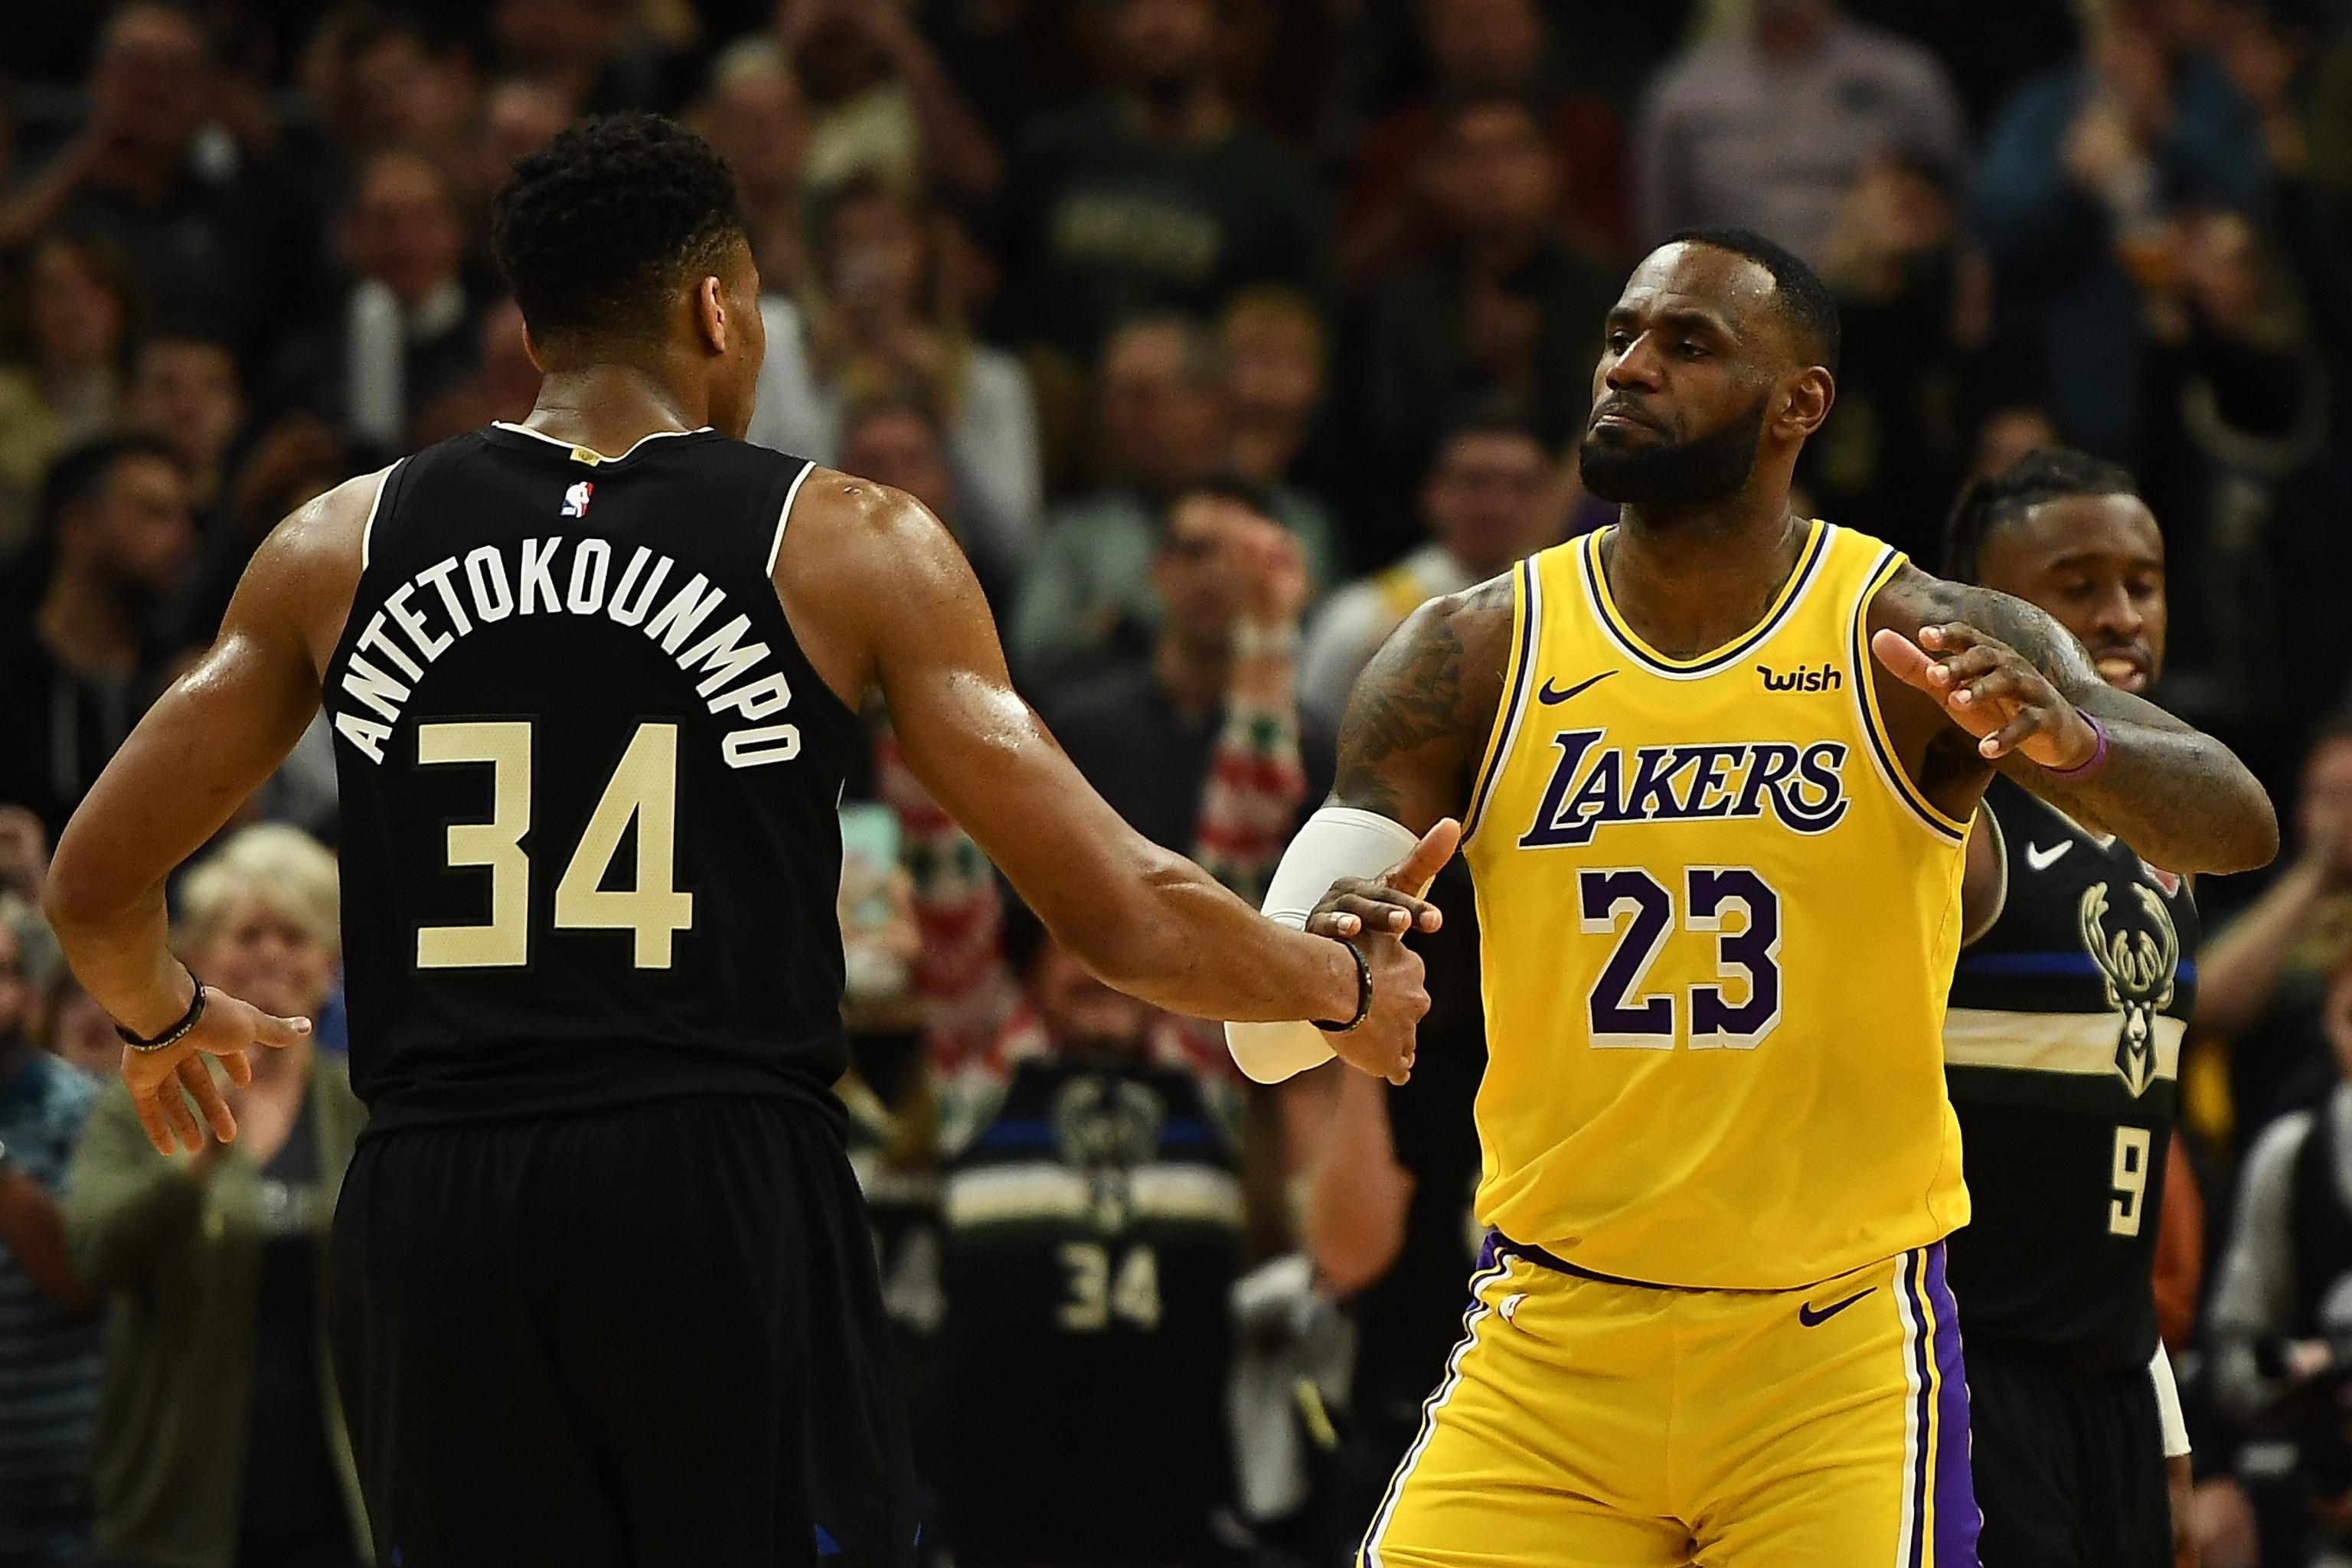 Nba All Star Game 2020 Rosters Revealed After Lebron Vs Giannis